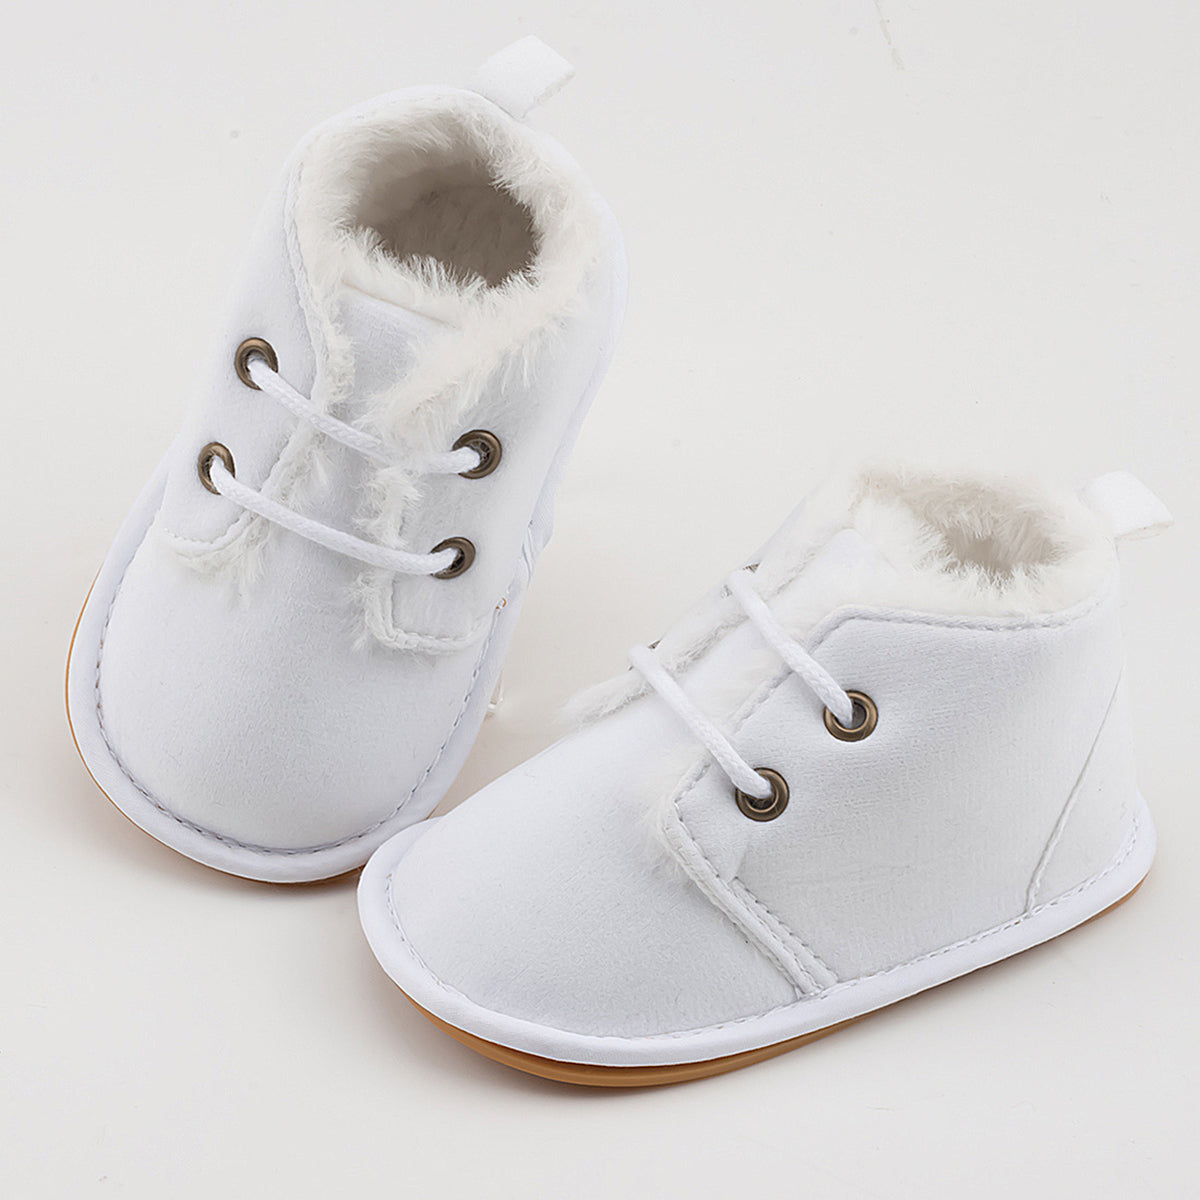 Round Toe Thermal Kid Sneakers White / 4C Apparel and Accessories